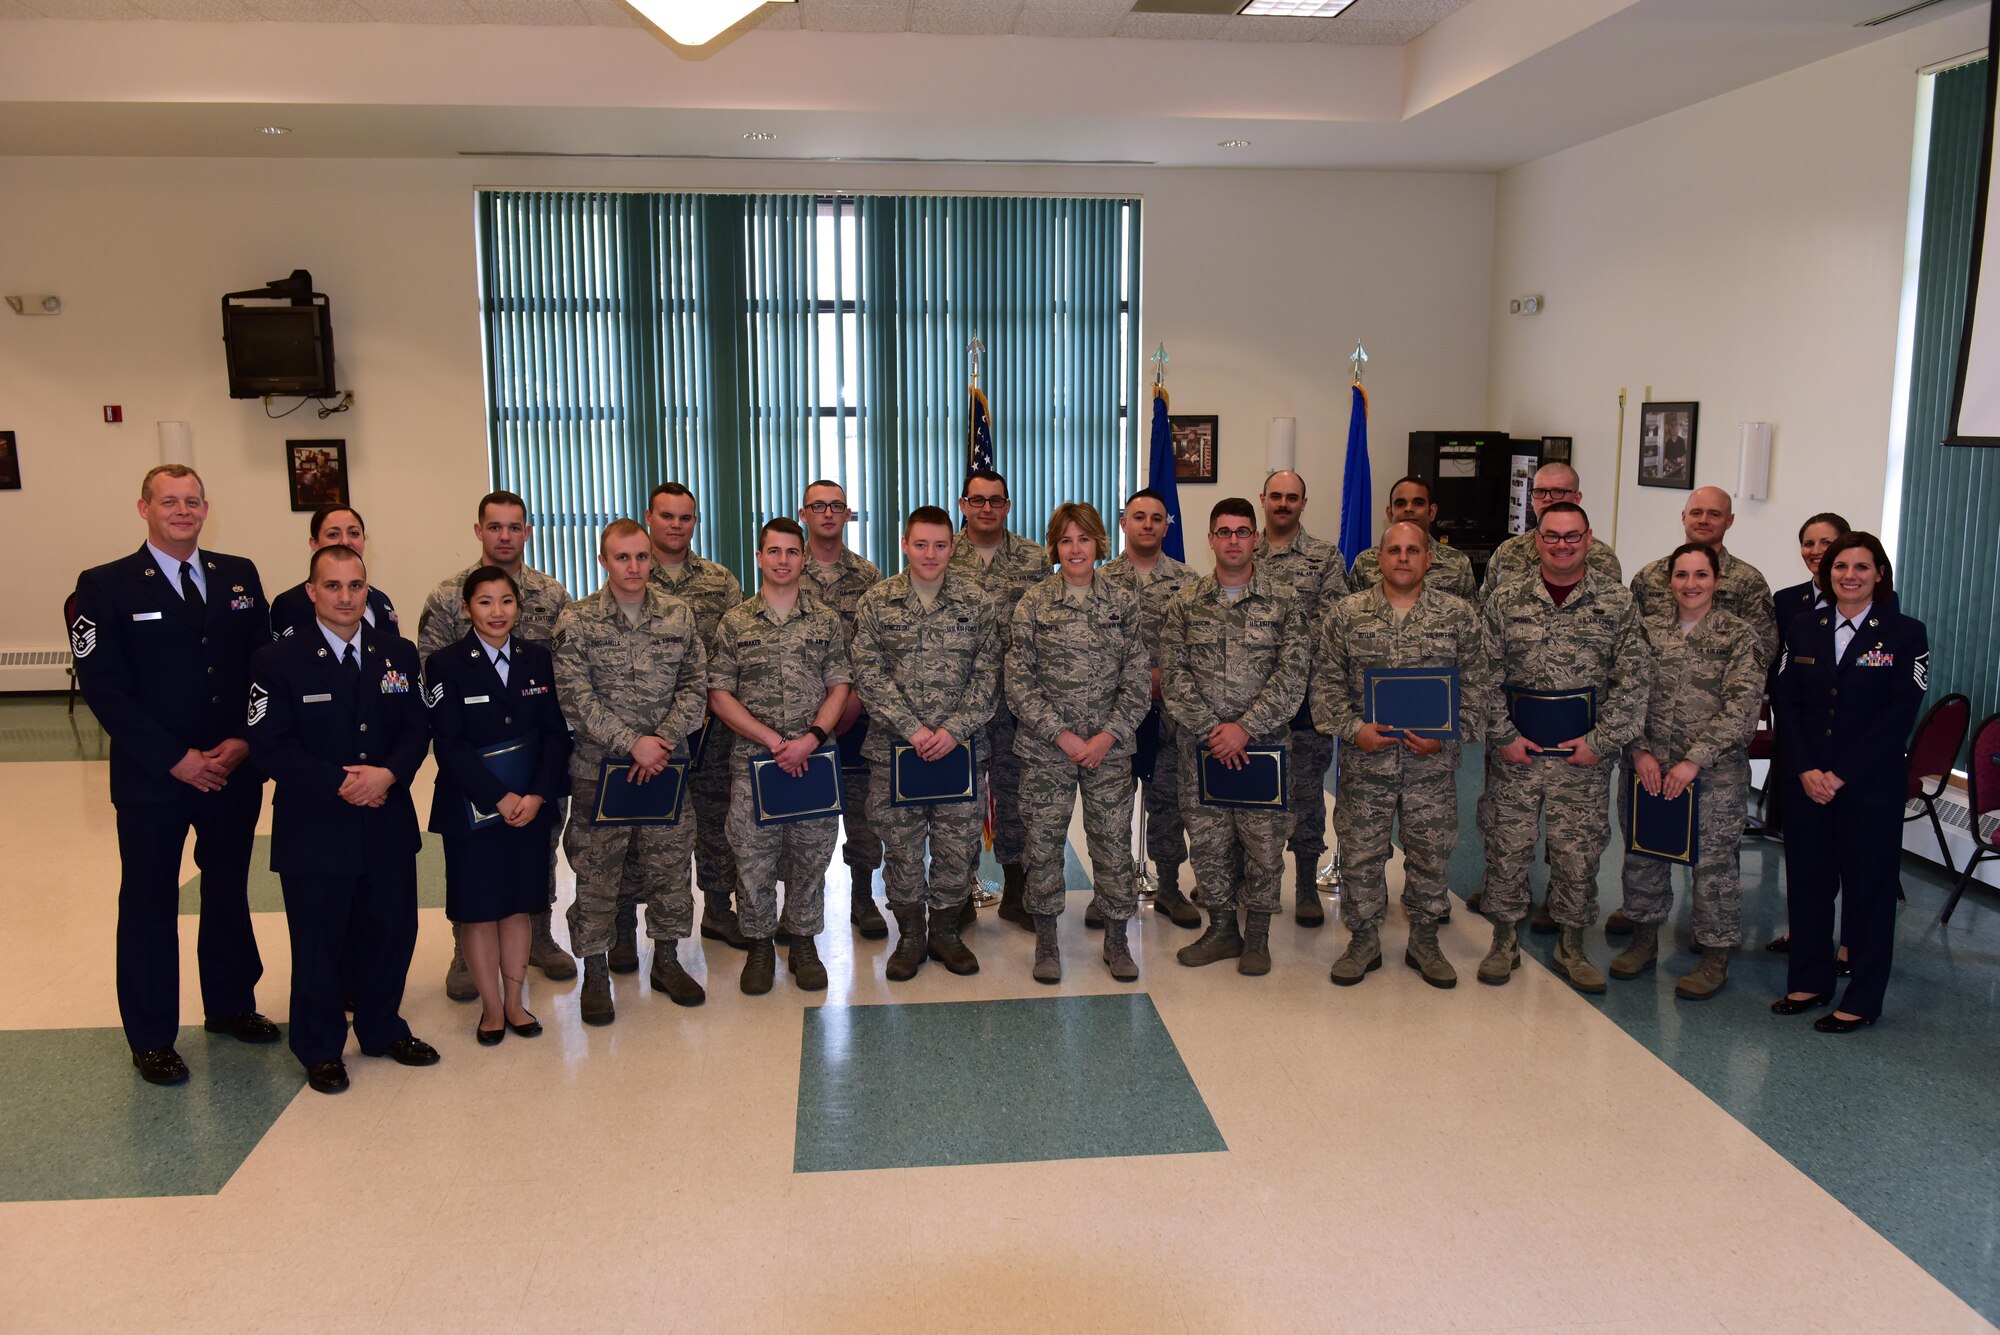 Airmen recognized at the first Non-Commissioned Officer induction ceremony, held at Stratton Air National Guard Base, pose for a group photo, Scotia, New York on June 3, 2017.  The induction ceremony recognizes Airmen who were promoted to staff sergeant between May 1, 2016 and May 15, 2017. More than 30 Airmen were recognized during the ceremony. (U.S. Air National Guard photo by Staff Sgt. Benjamin German/Released)